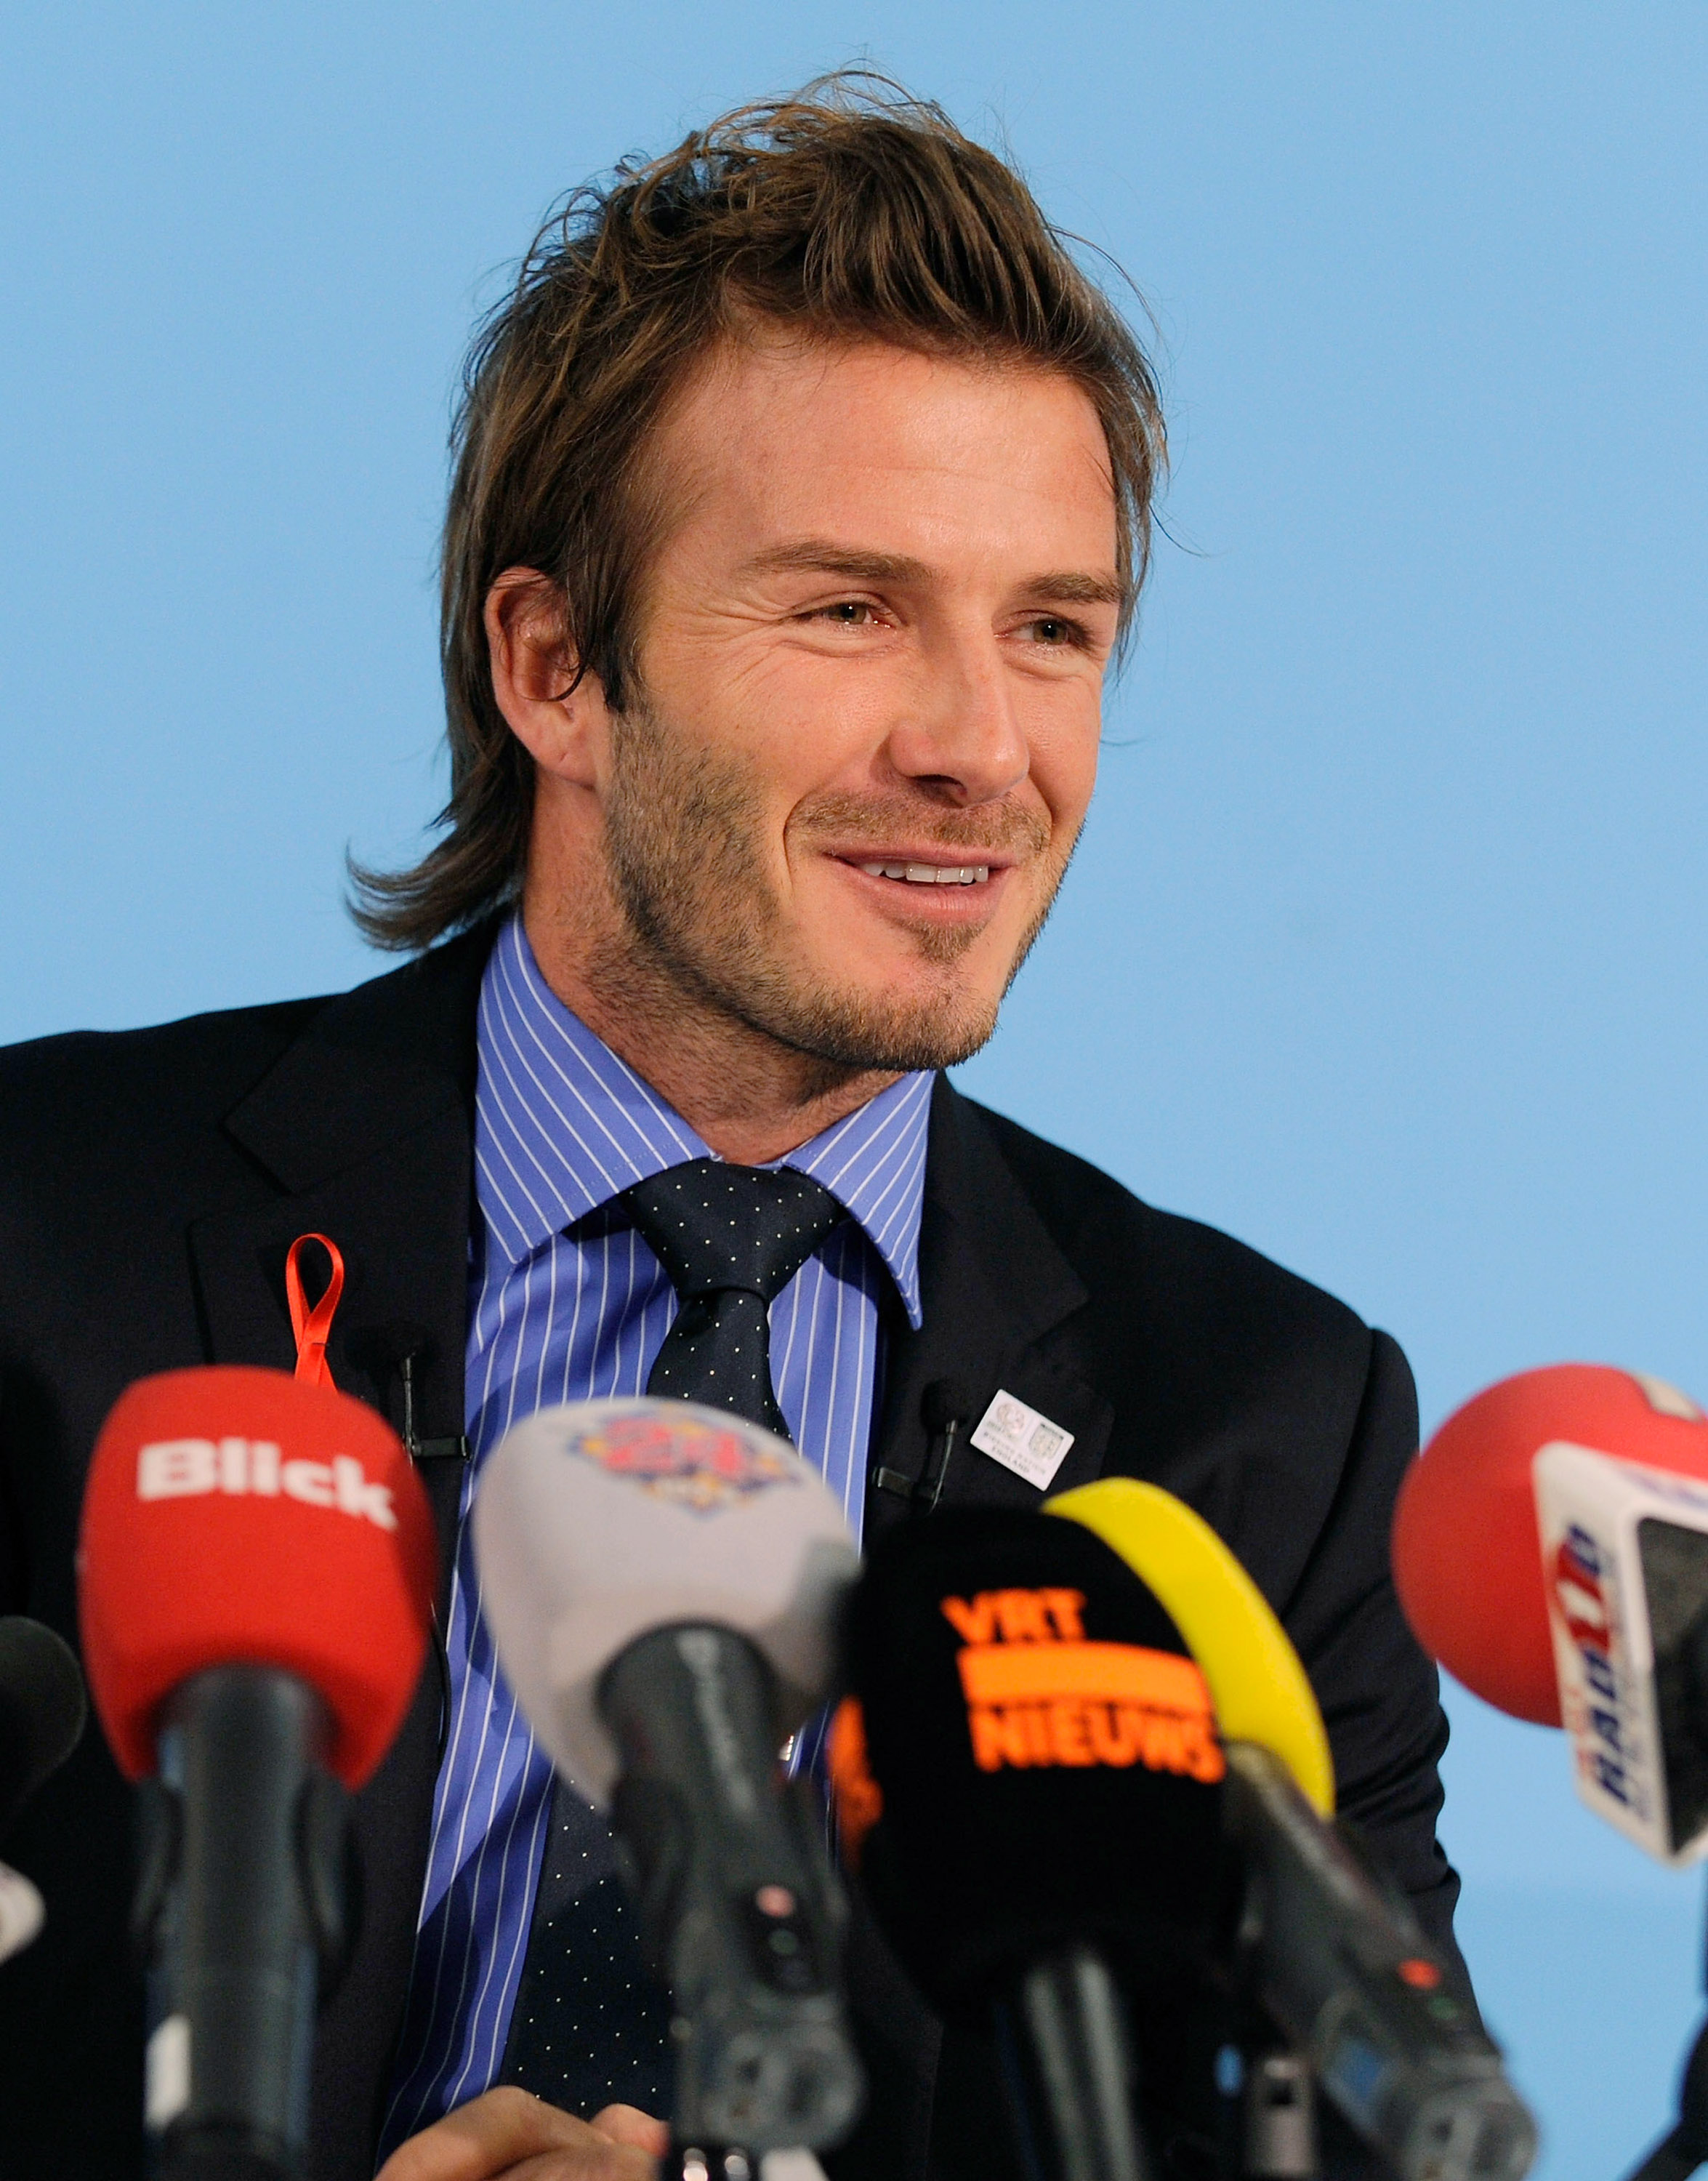 ZURICH, SWITZERLAND - DECEMBER 01:  David Beckham speaks to the media during an England press conference ahead of the FIFA World Cup 2018 host countries annoucement at the Swissotel on December 1, 2010 in Zurich, Switzerland.  (Photo by Michael Regan/Gett